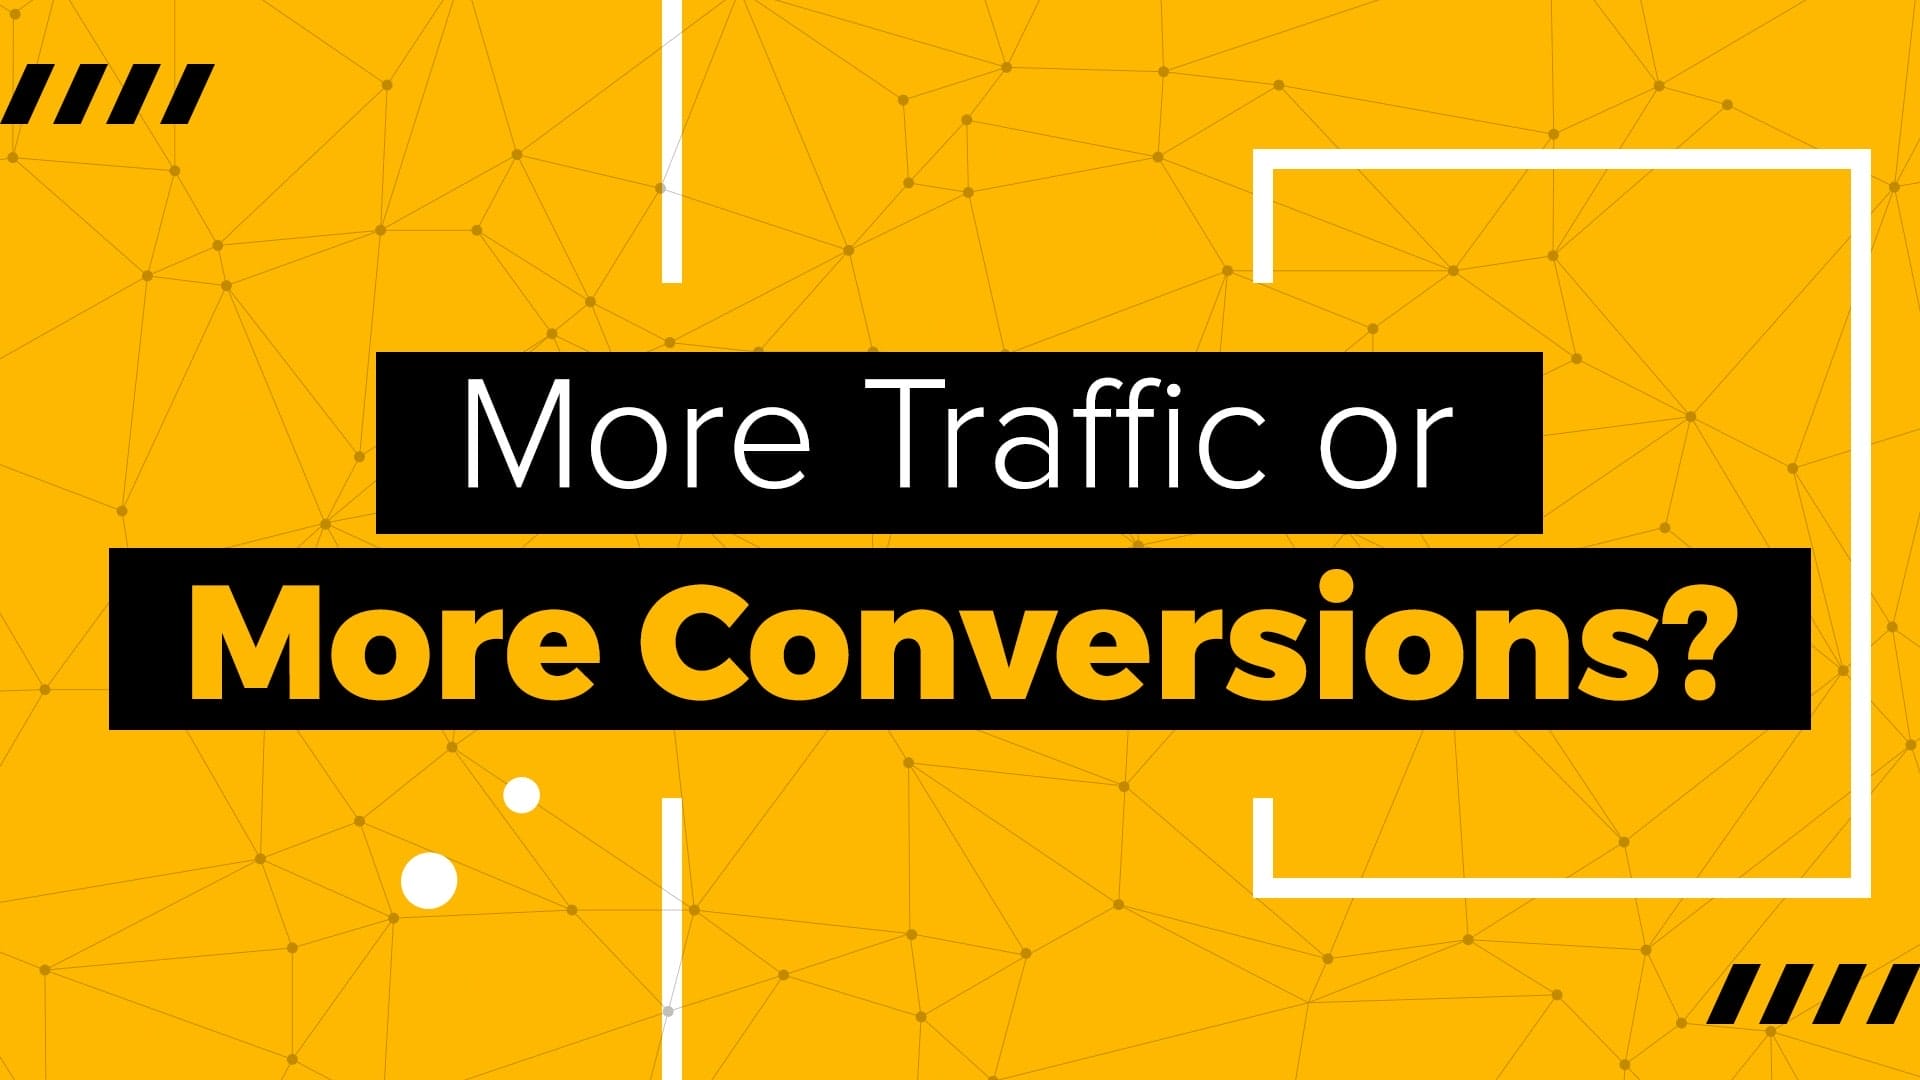 More Traffic or More Conversions?